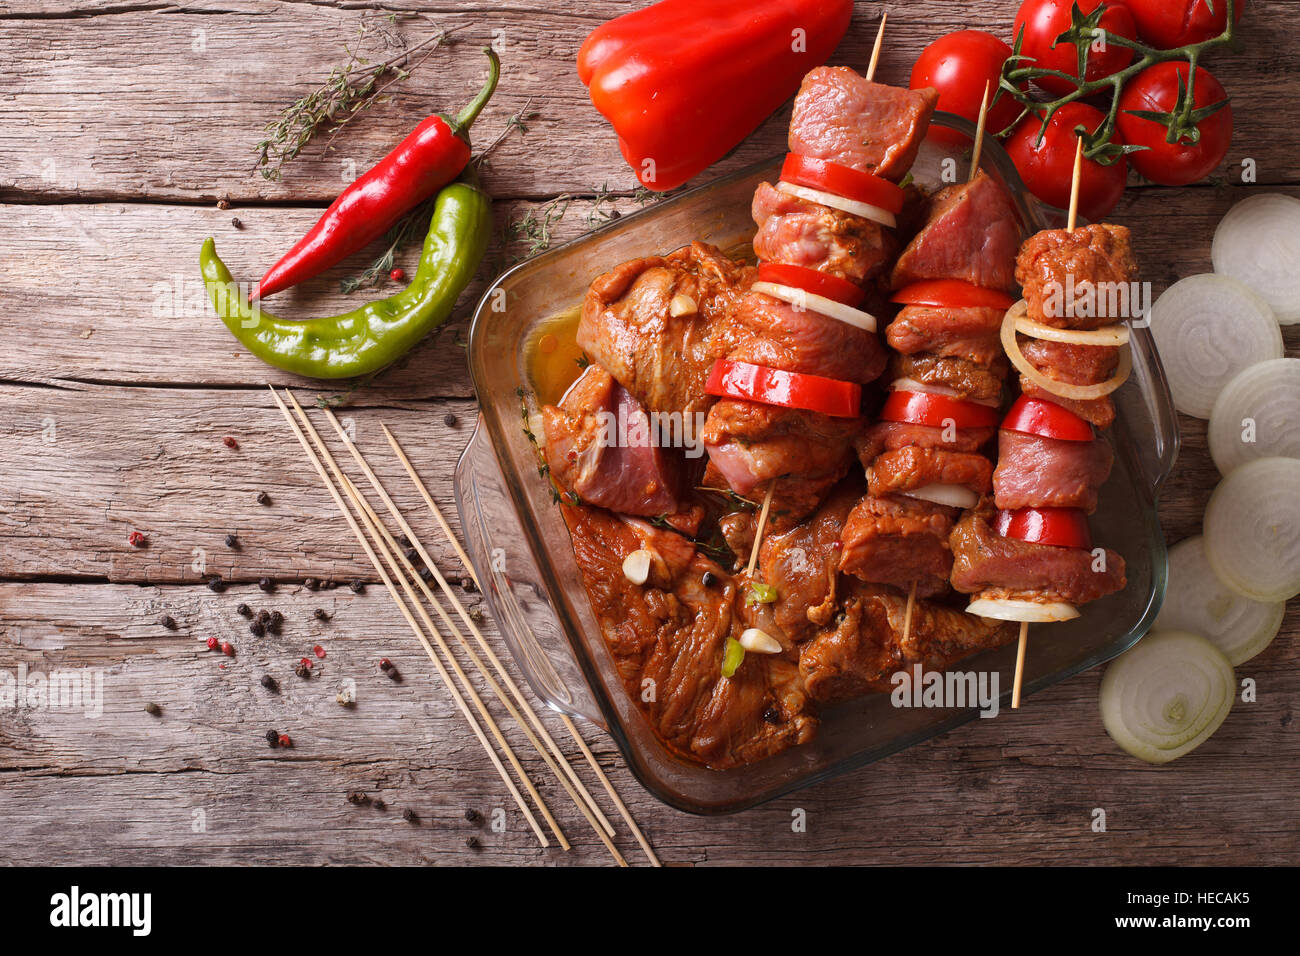 Preparing food for cooking barbecue on skewers. horizontal view from above, rustic Stock Photo